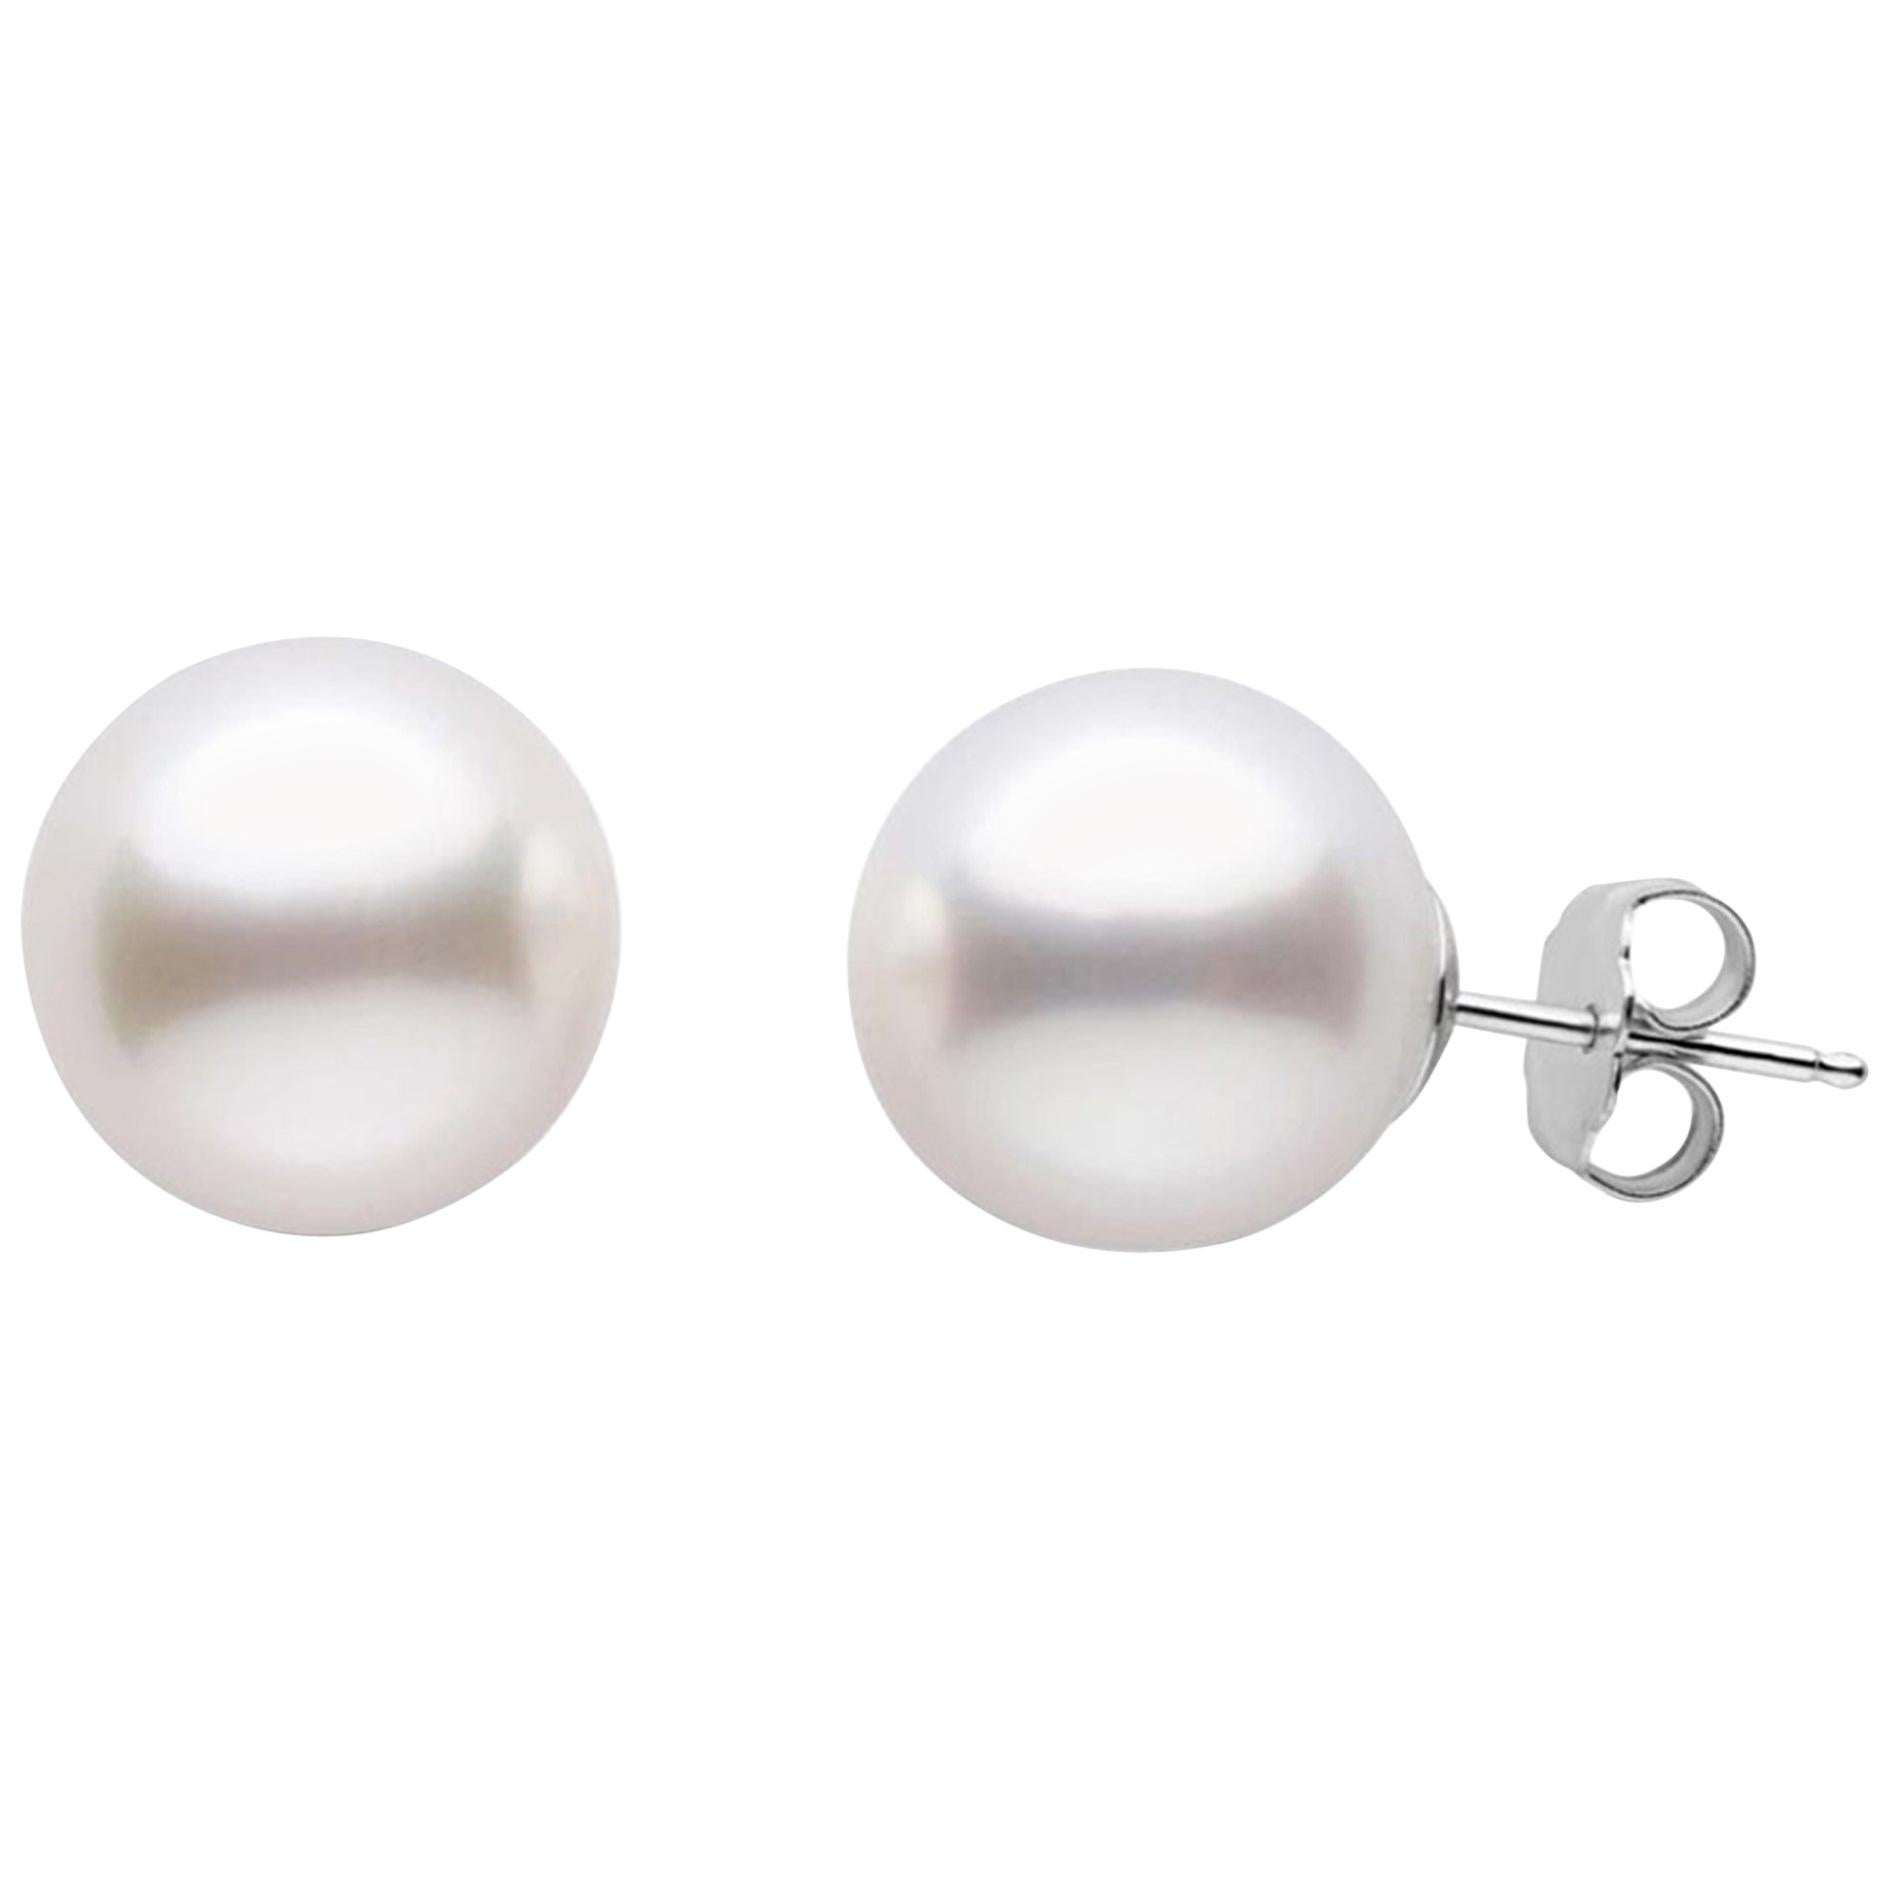 AAA Quality Round South Sea Cultured Pearl Earring Stud on 14 Karat White Gold im Angebot